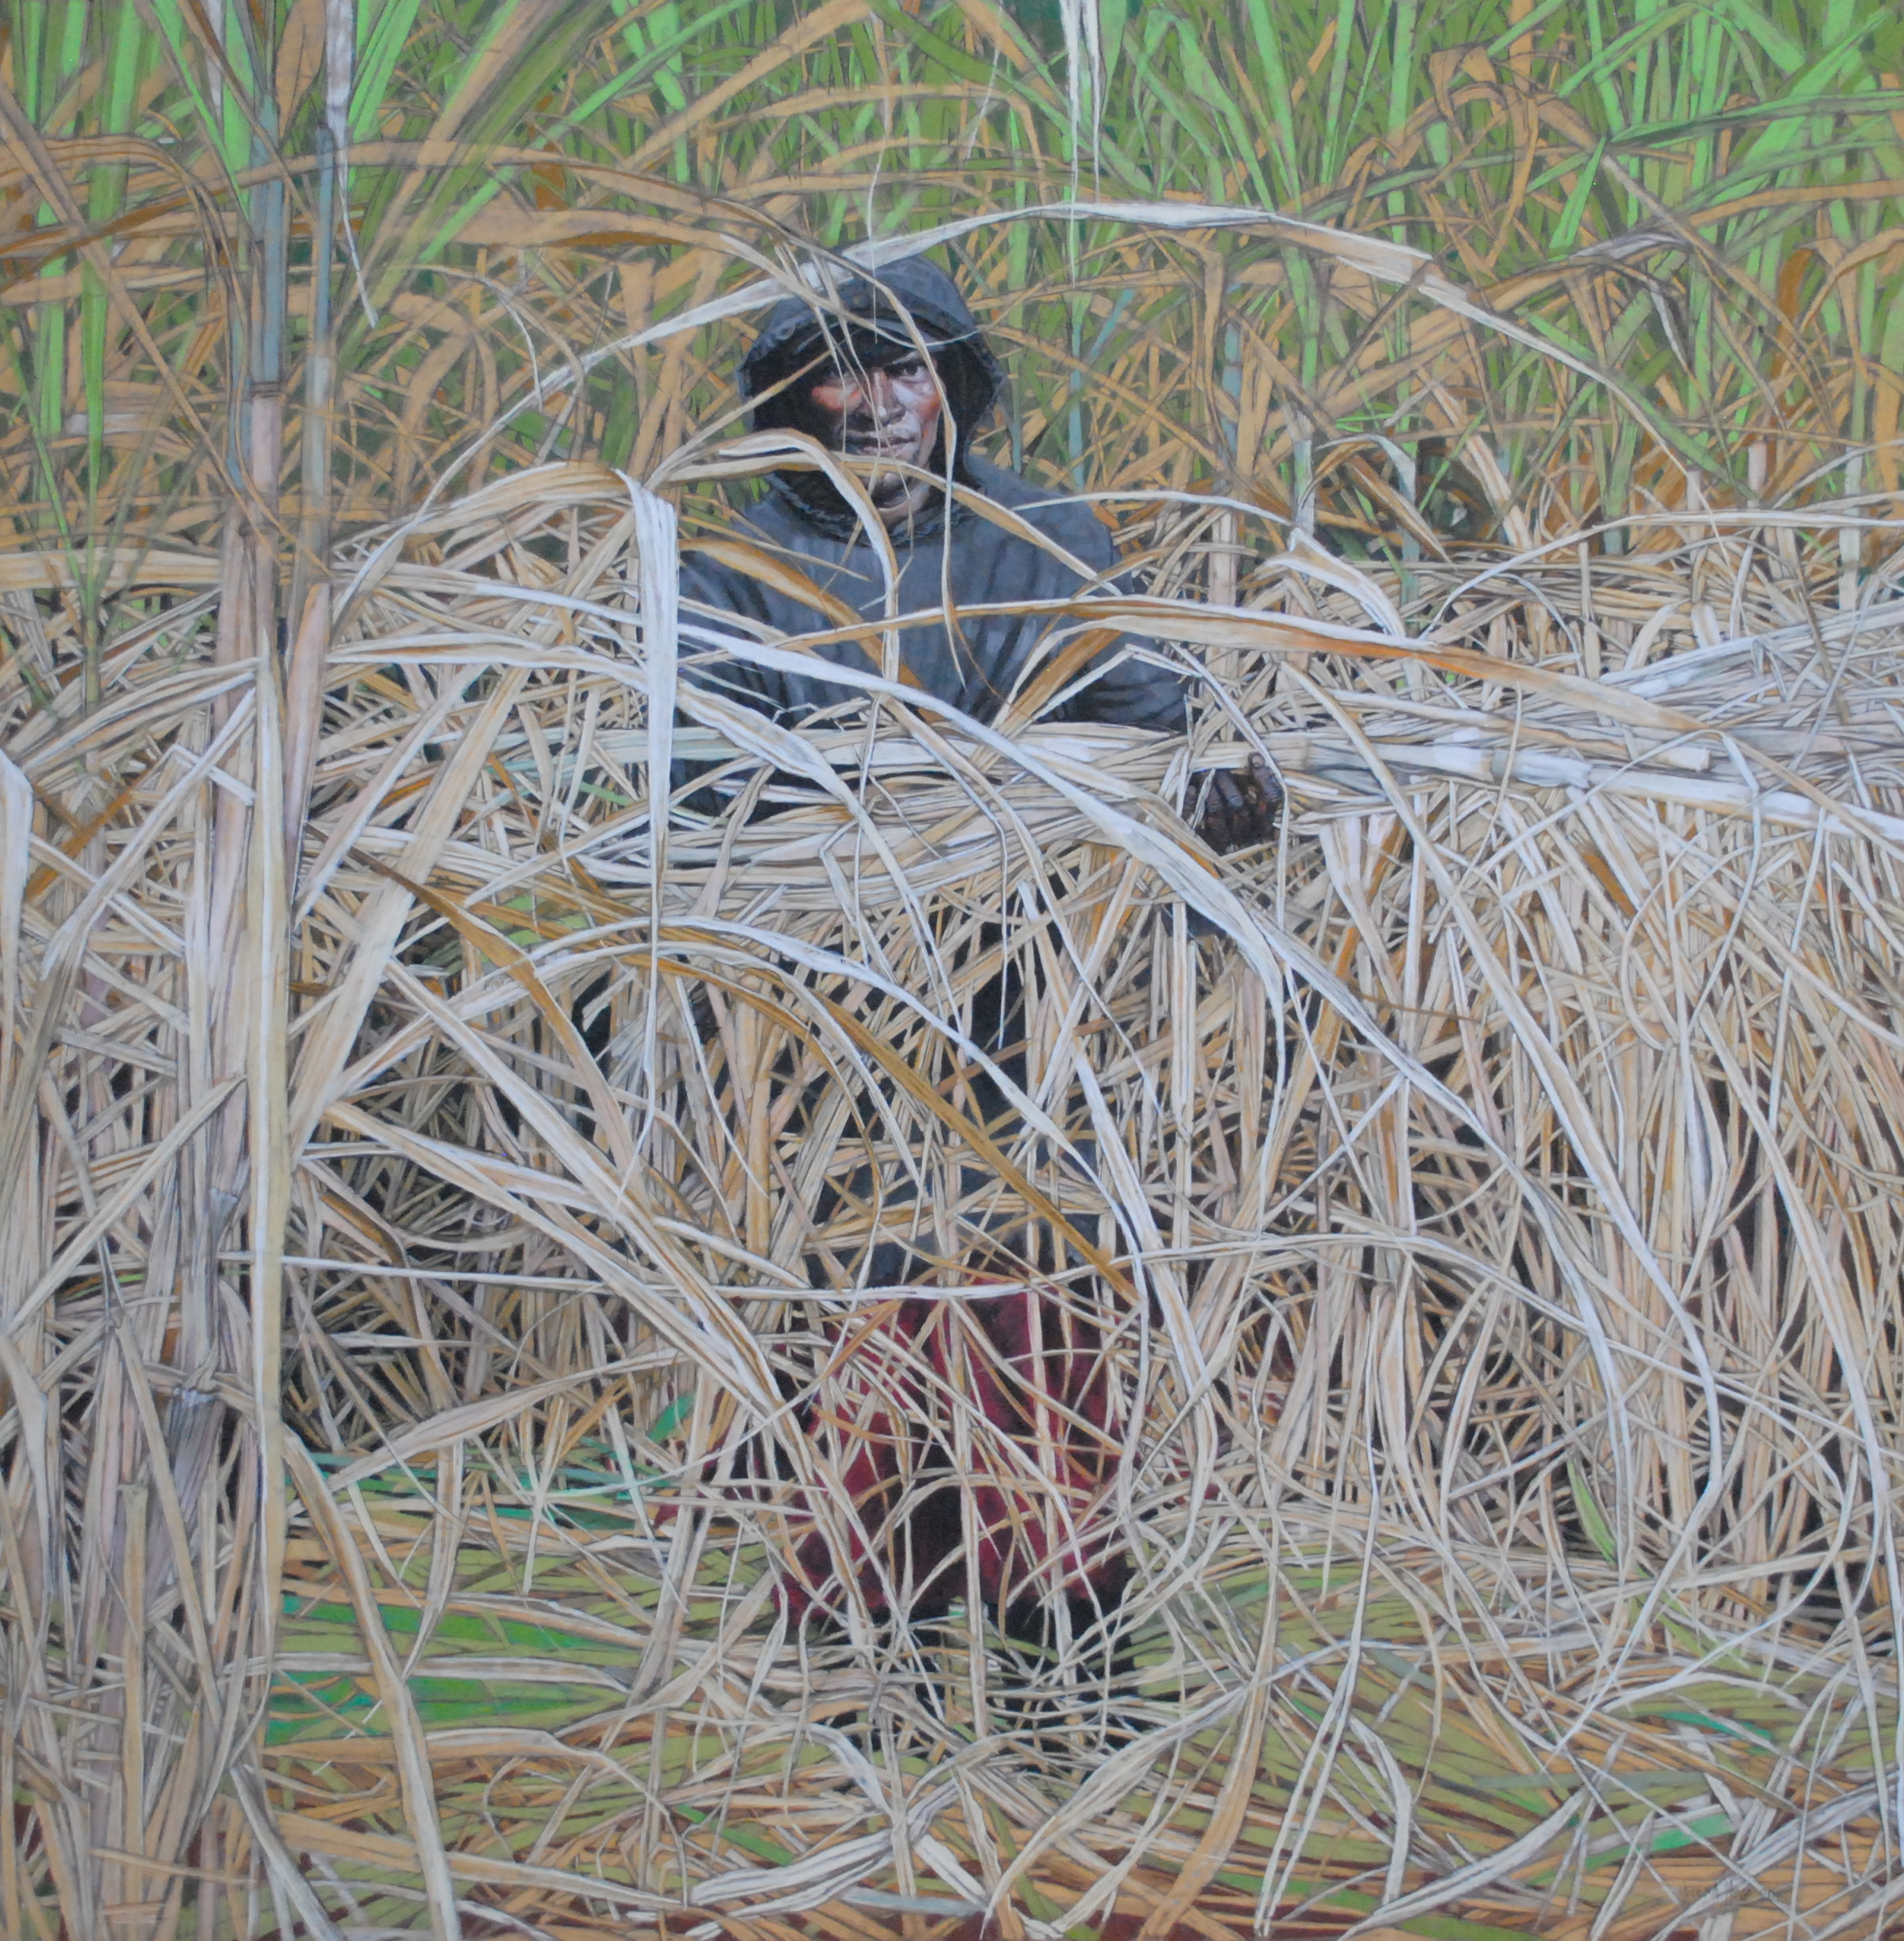 Reaping the Harvest I

122cm x122cm

Pastel on board